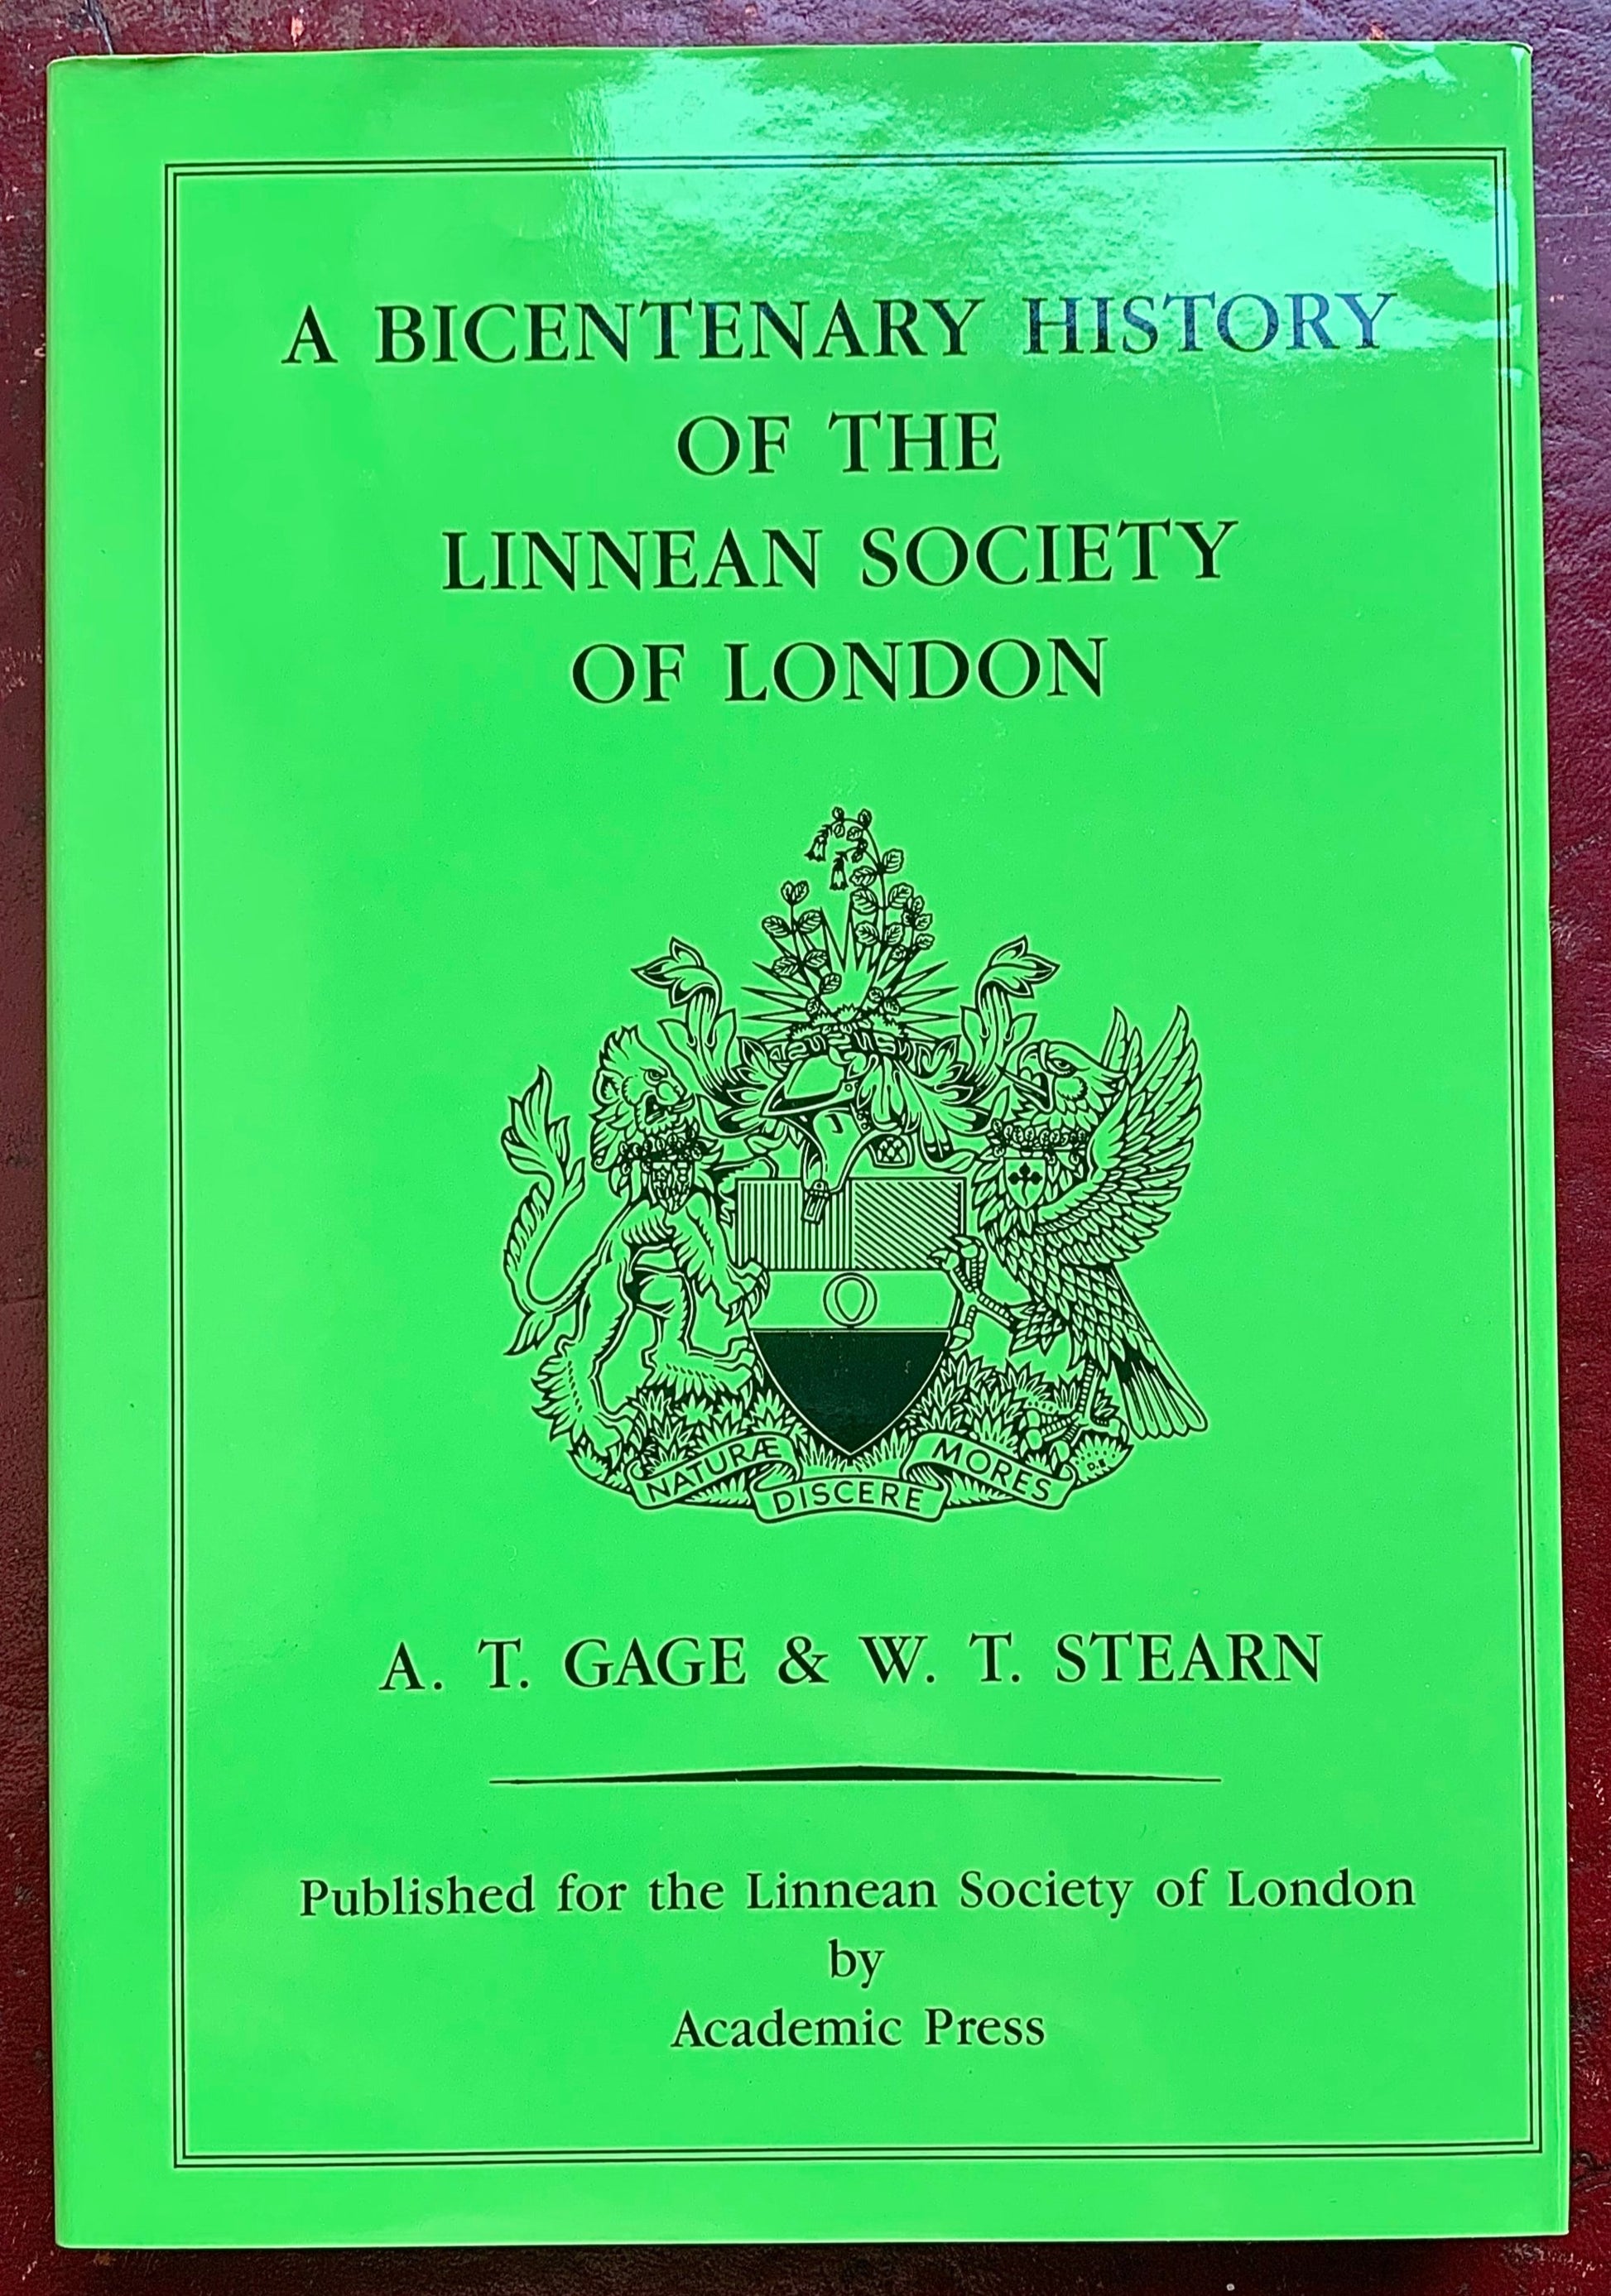 Front cover of A Bicentenary History of the Linnean Society of London